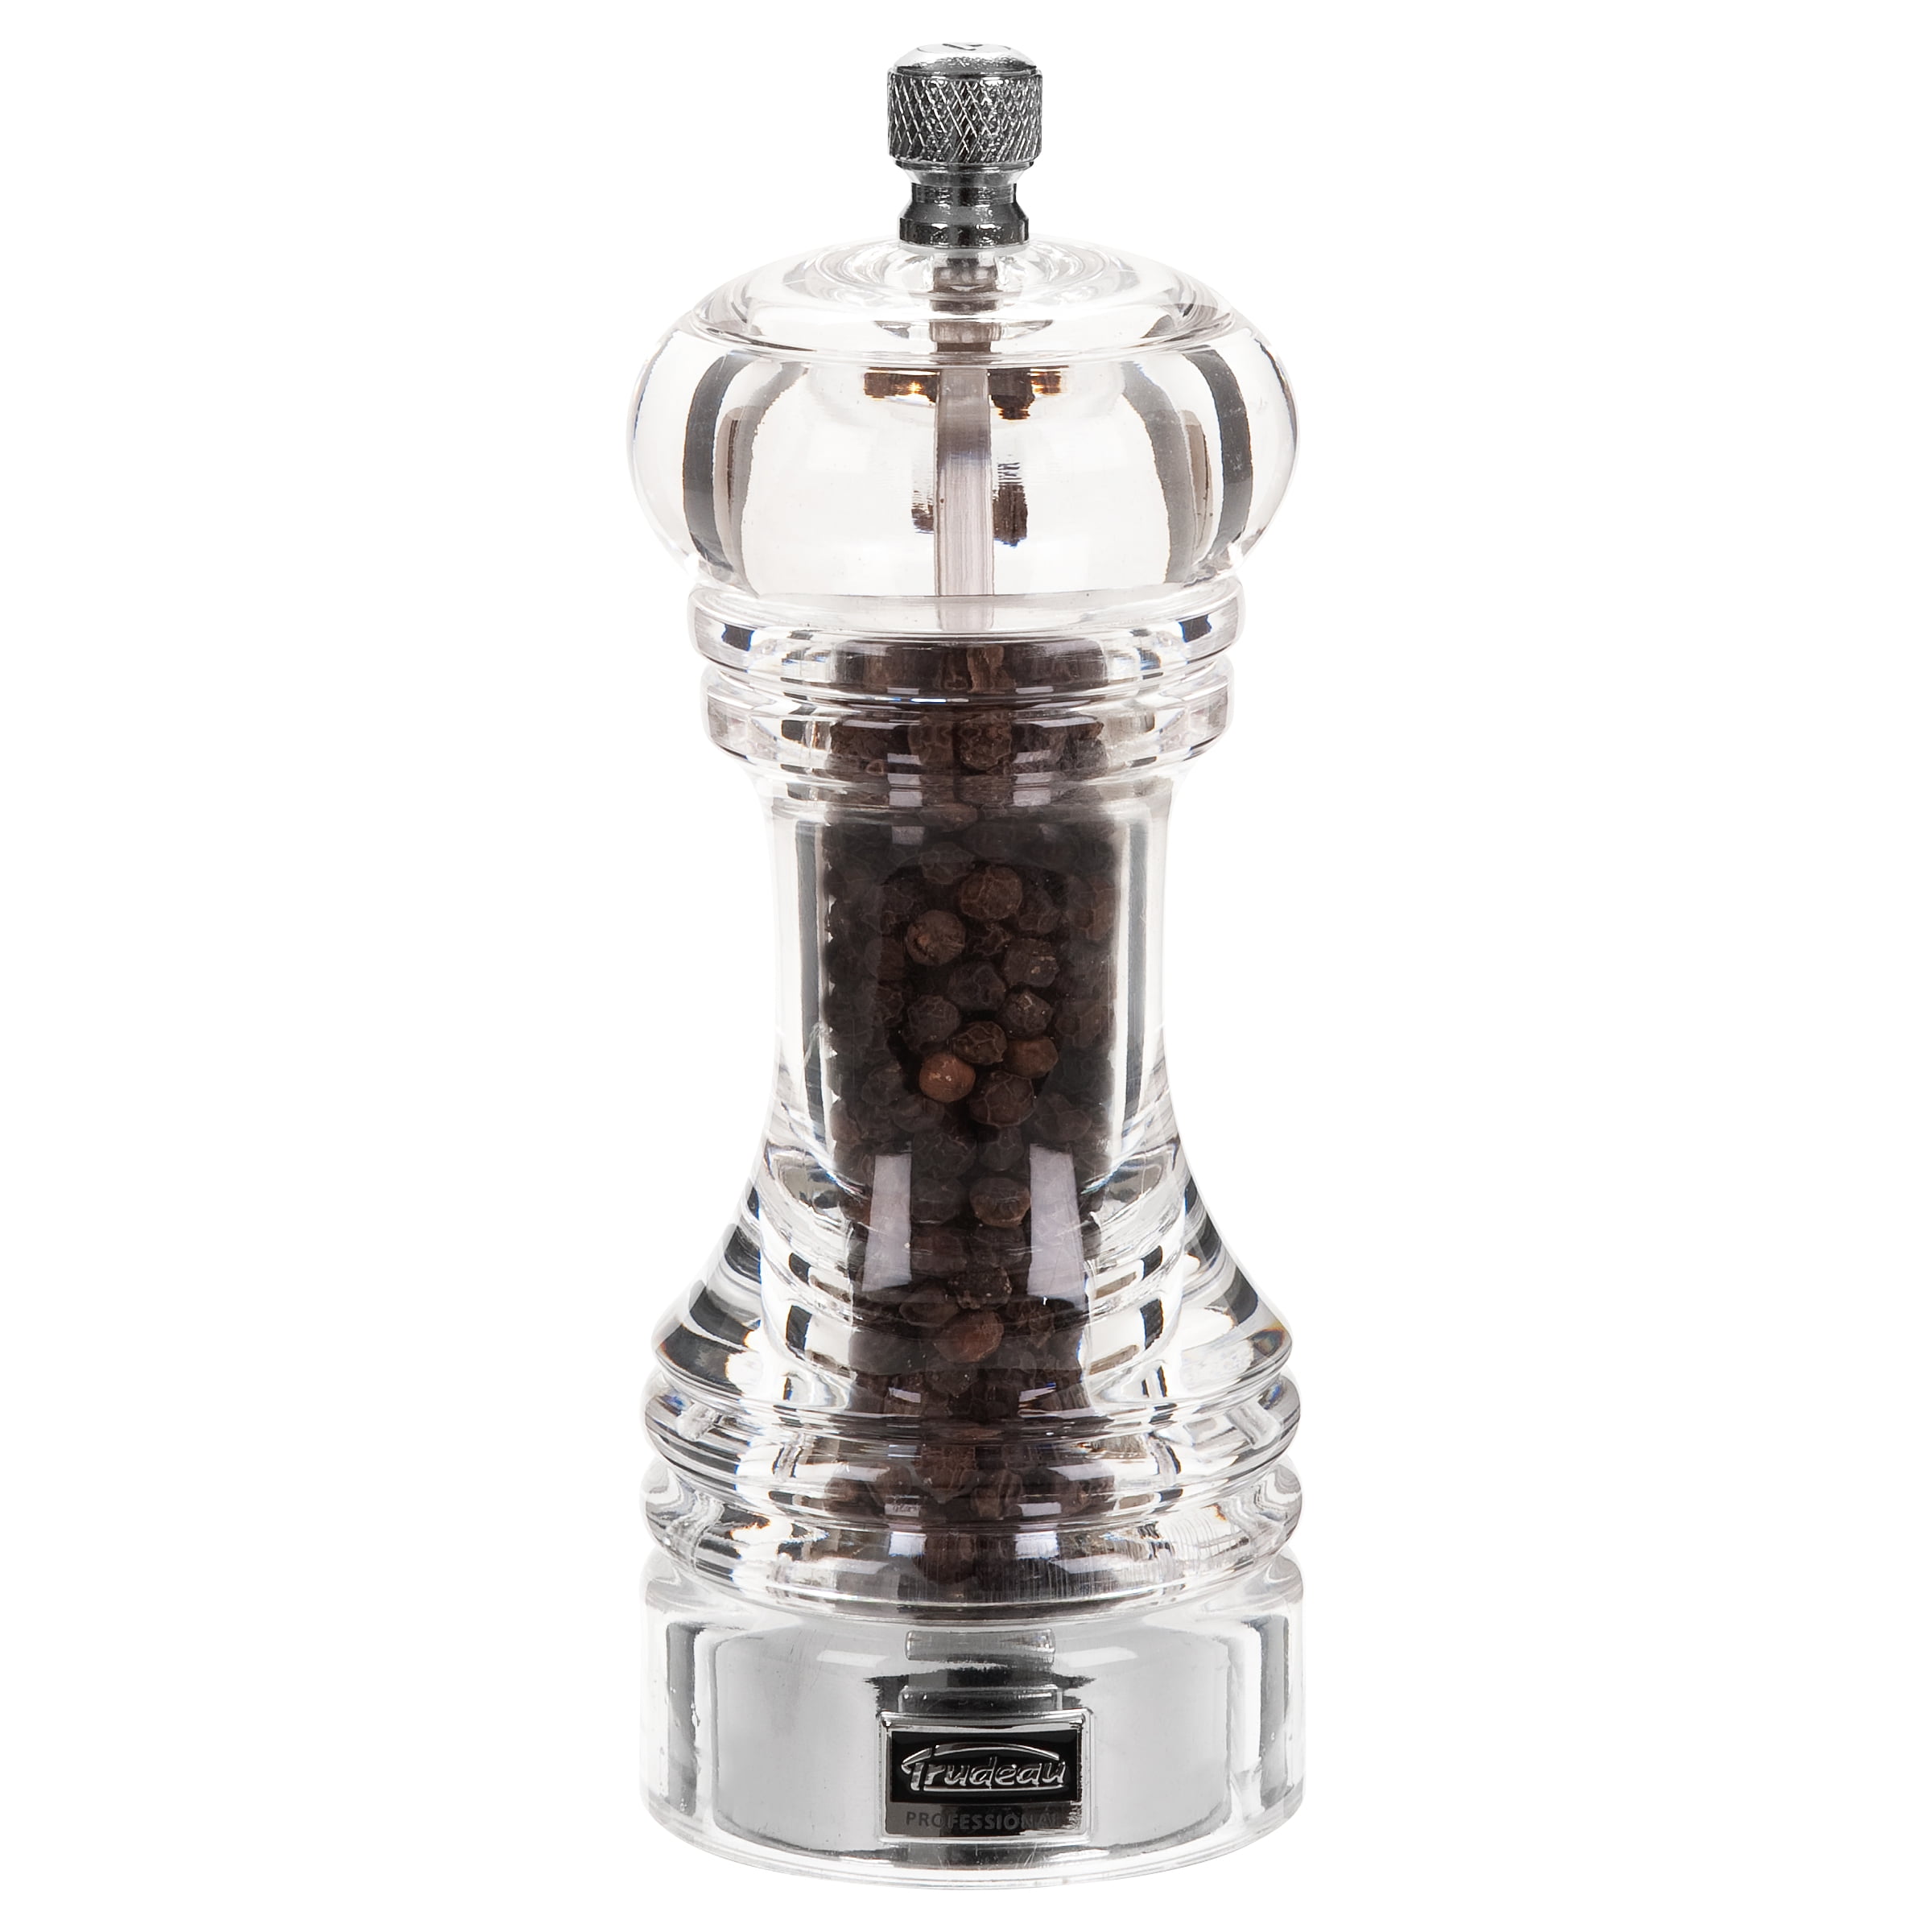 Trudeau 6" One-Hand Pepper Mill Grinder Stainless Steel NEW 